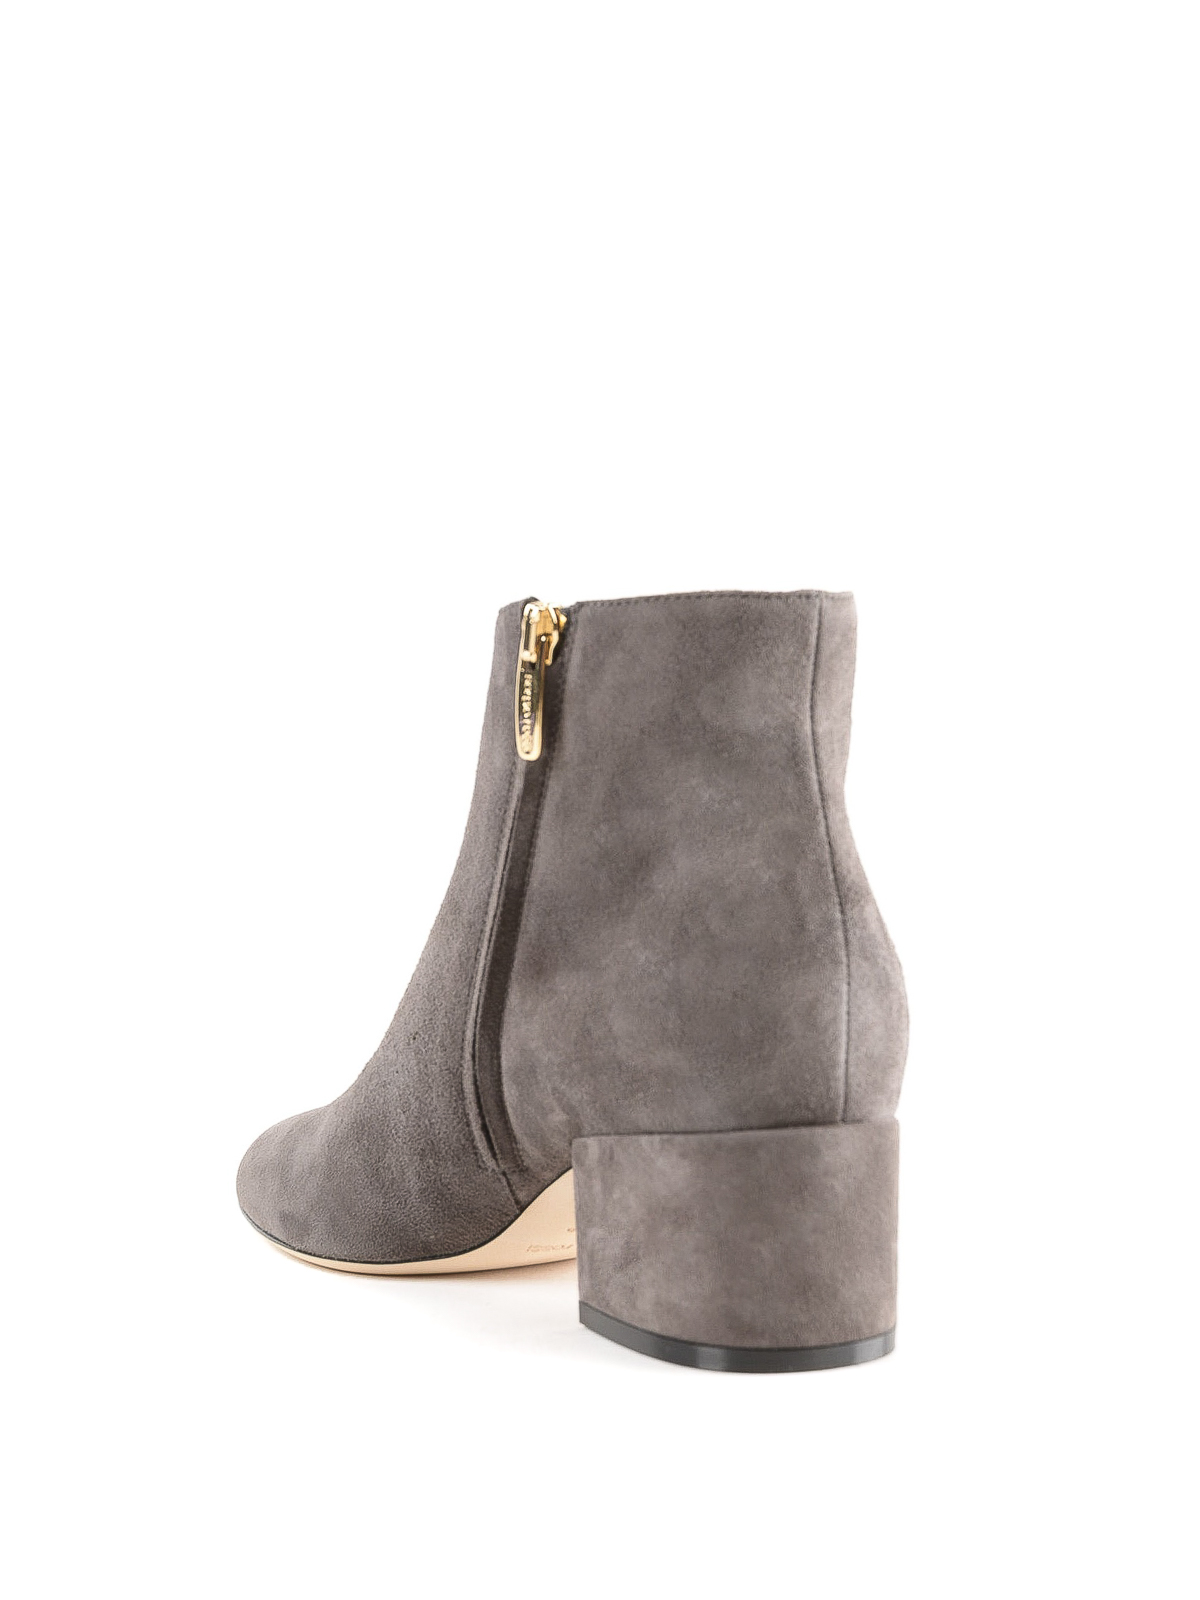 grey suede ankle boot